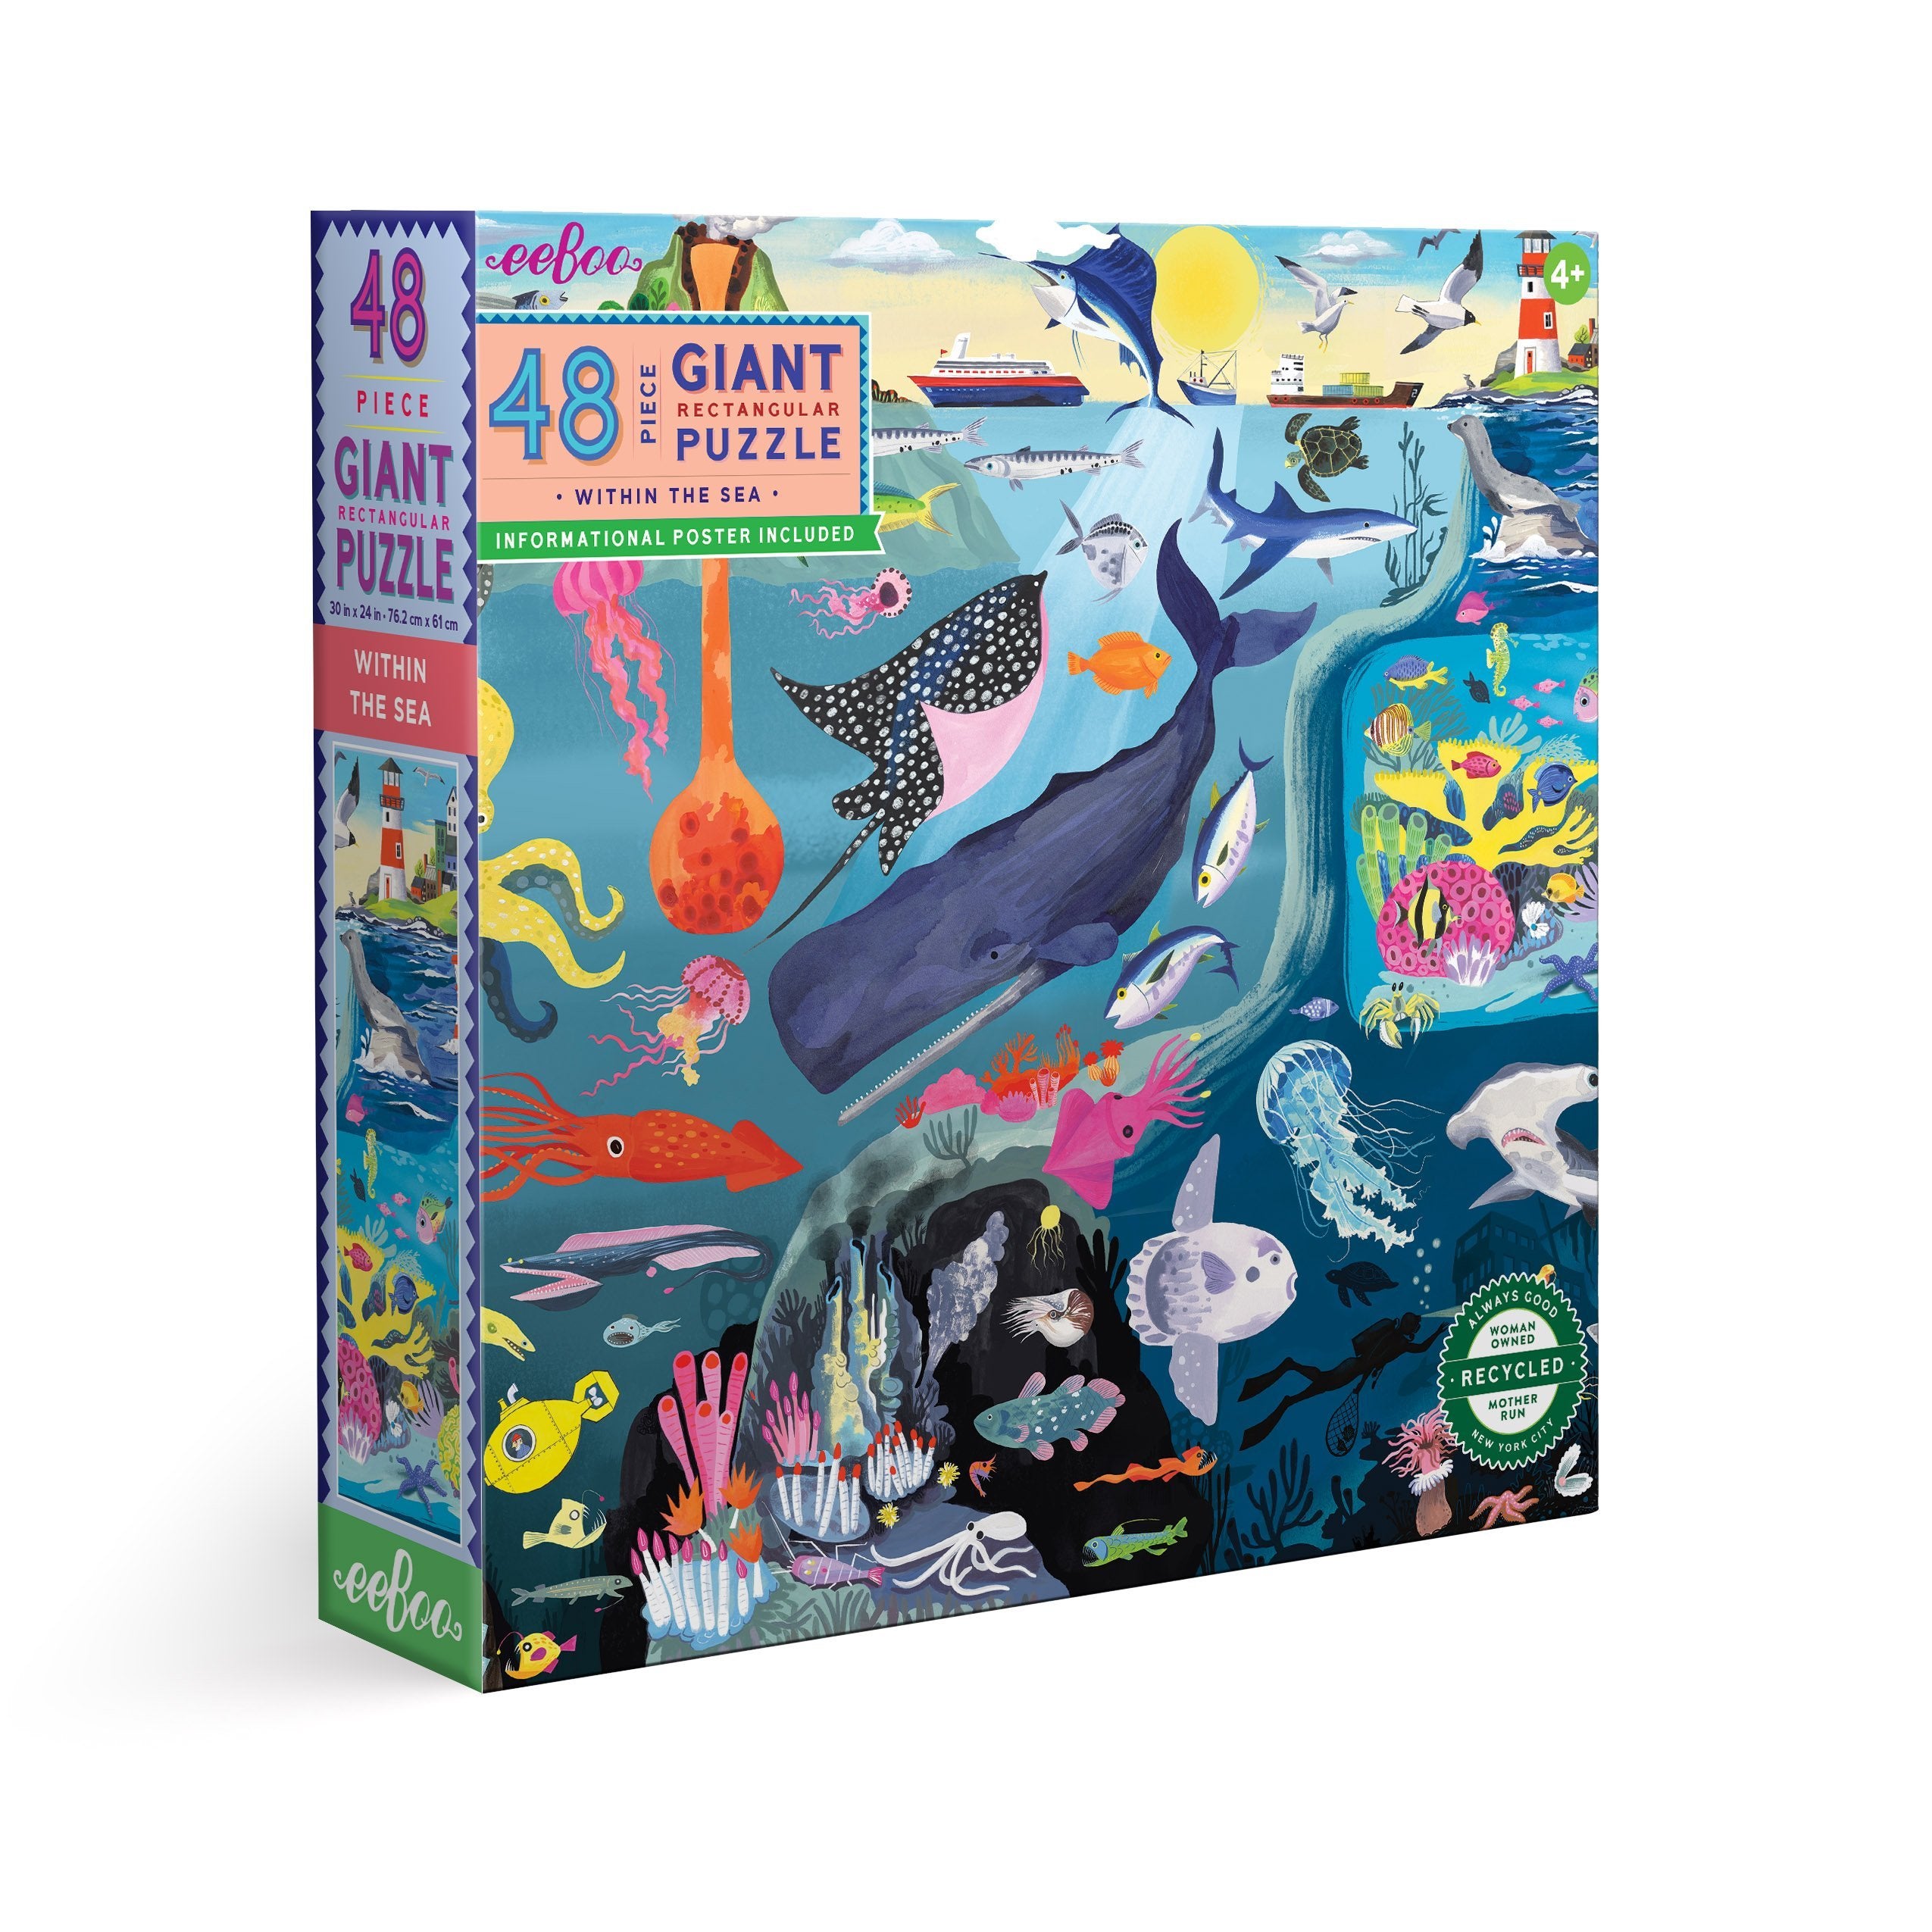 Within the Sea 48-Piece Puzzle